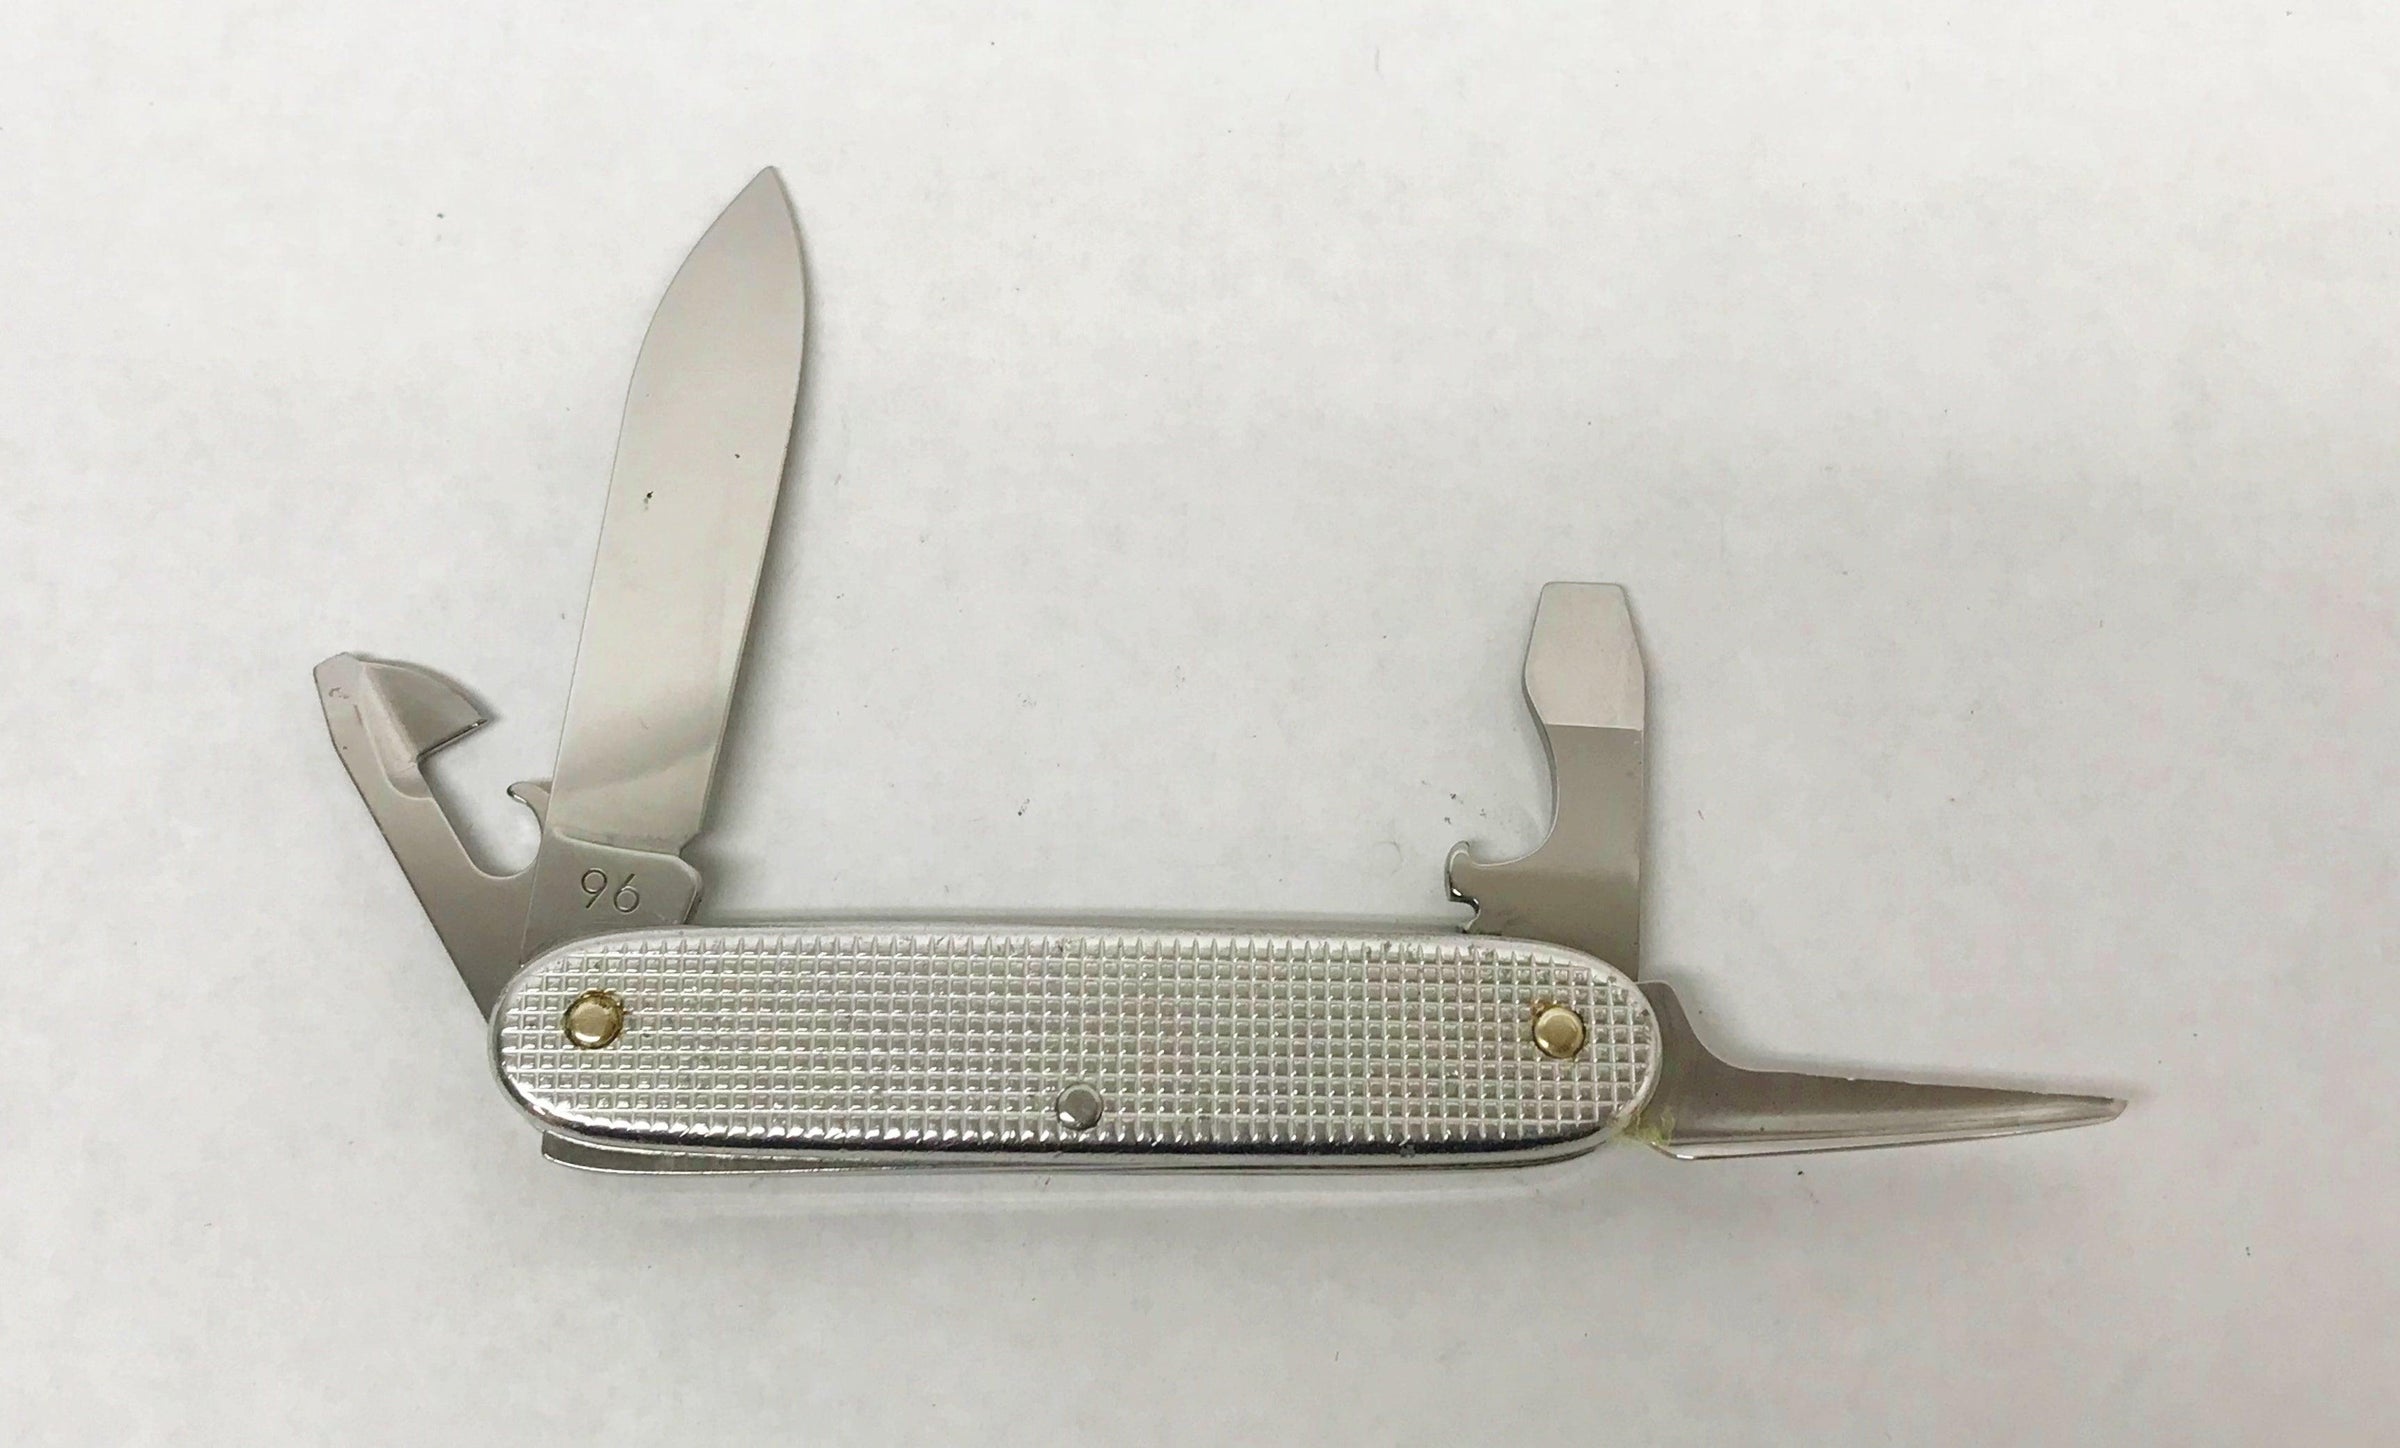 Vintage 1996 Swiss Army Victorinox Alox Soldier Pocket Knife In Box - Hers and His Treasures